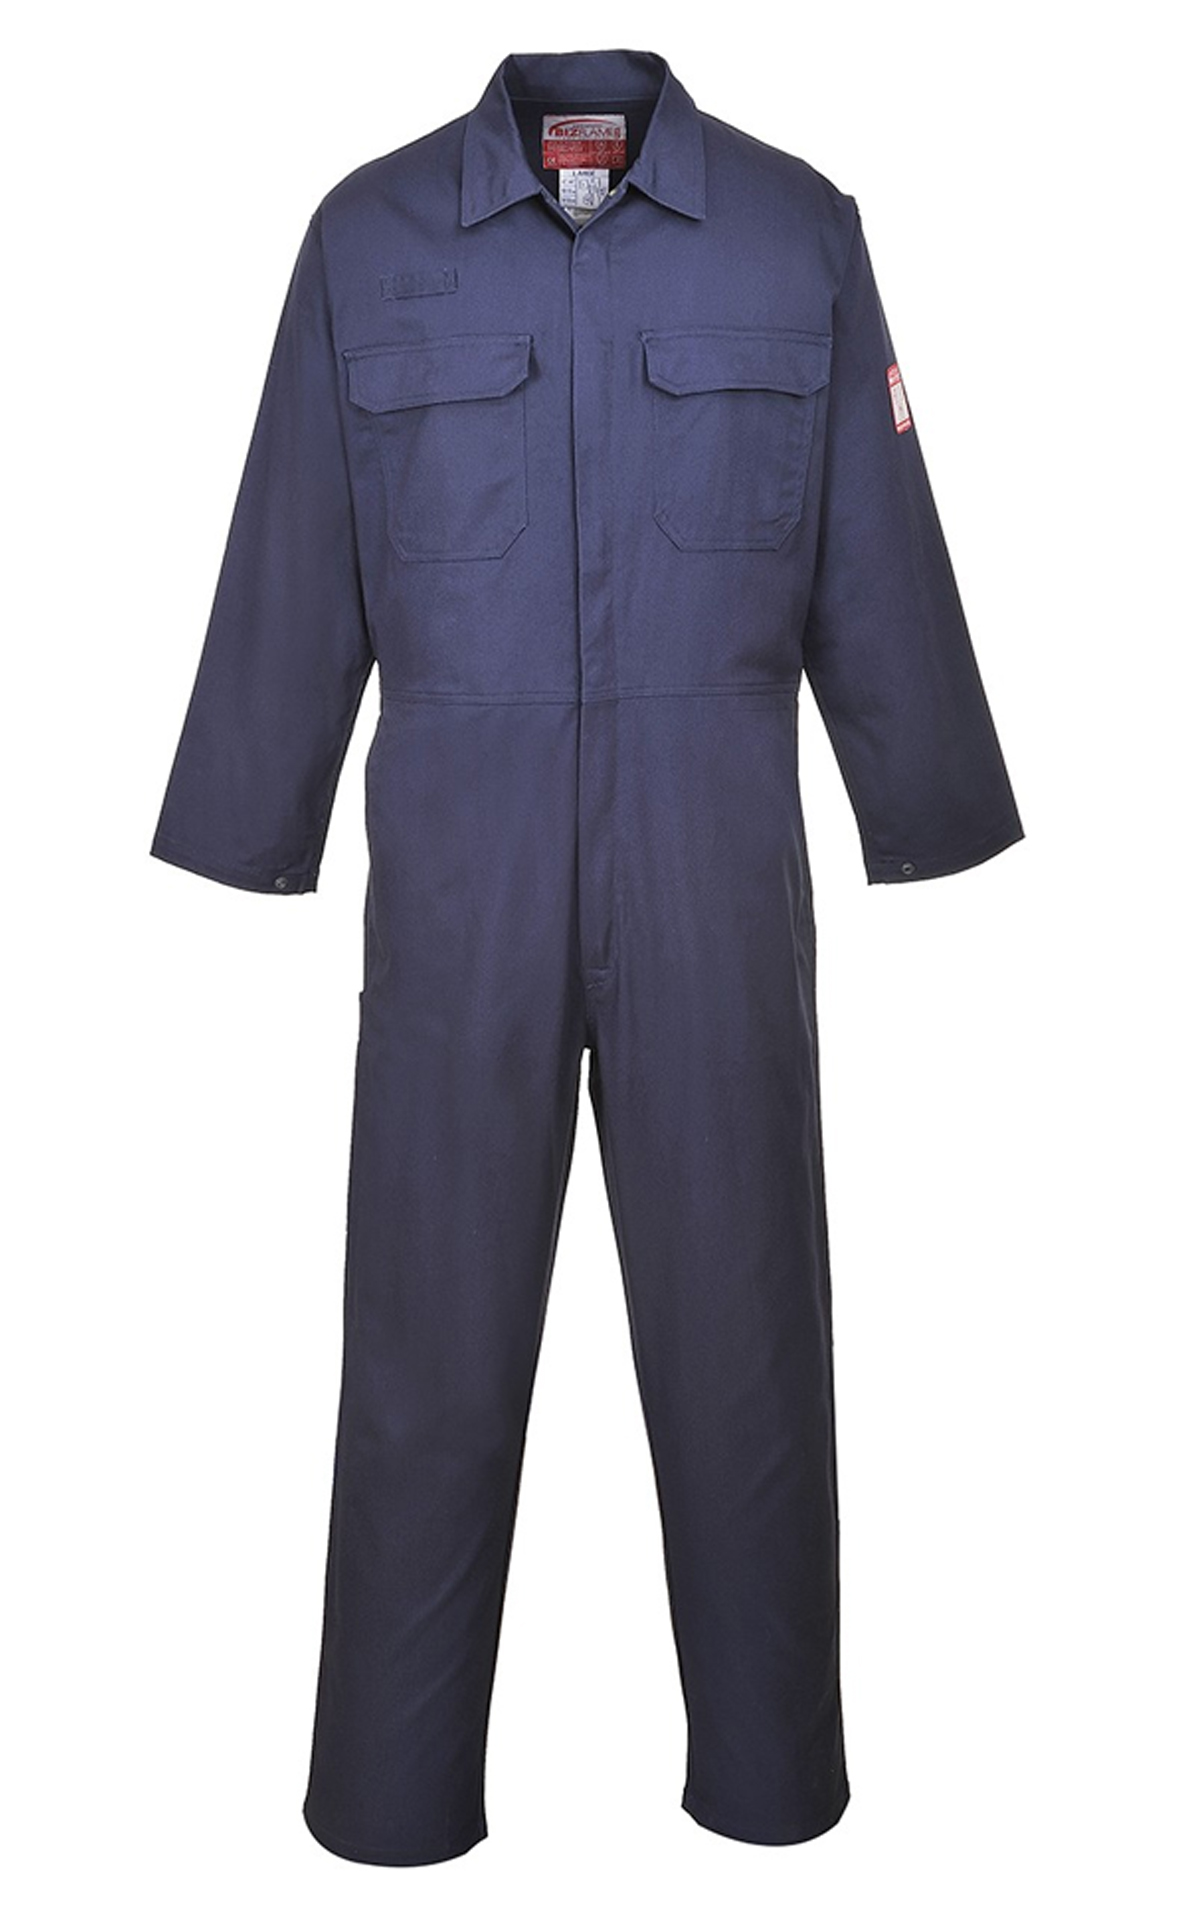 FR38 BIZFLAME Pro Coverall